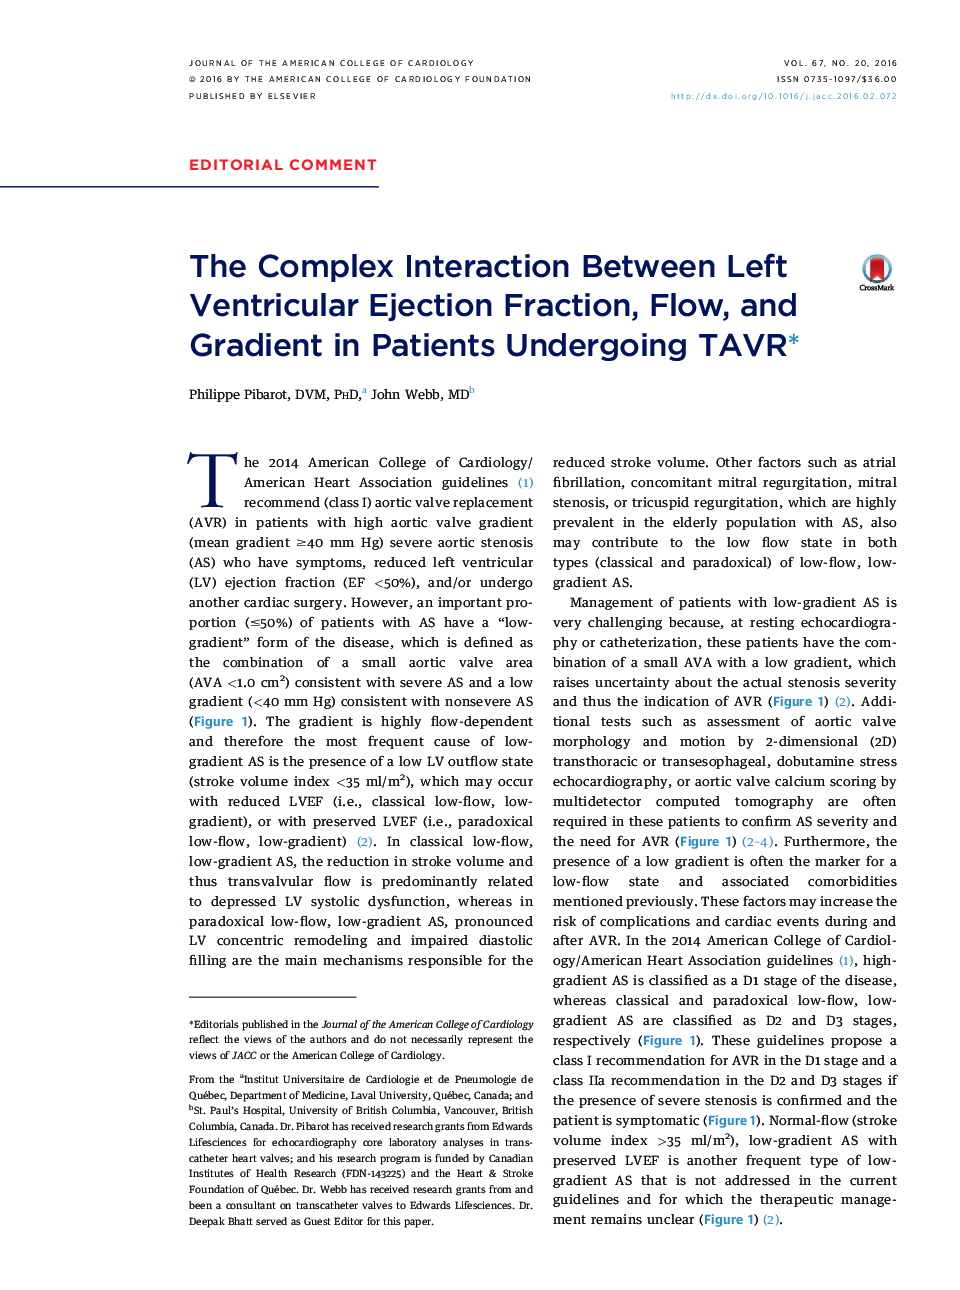 The Complex Interaction Between Left Ventricular Ejection Fraction, Flow, and Gradient in Patients Undergoing TAVRâ